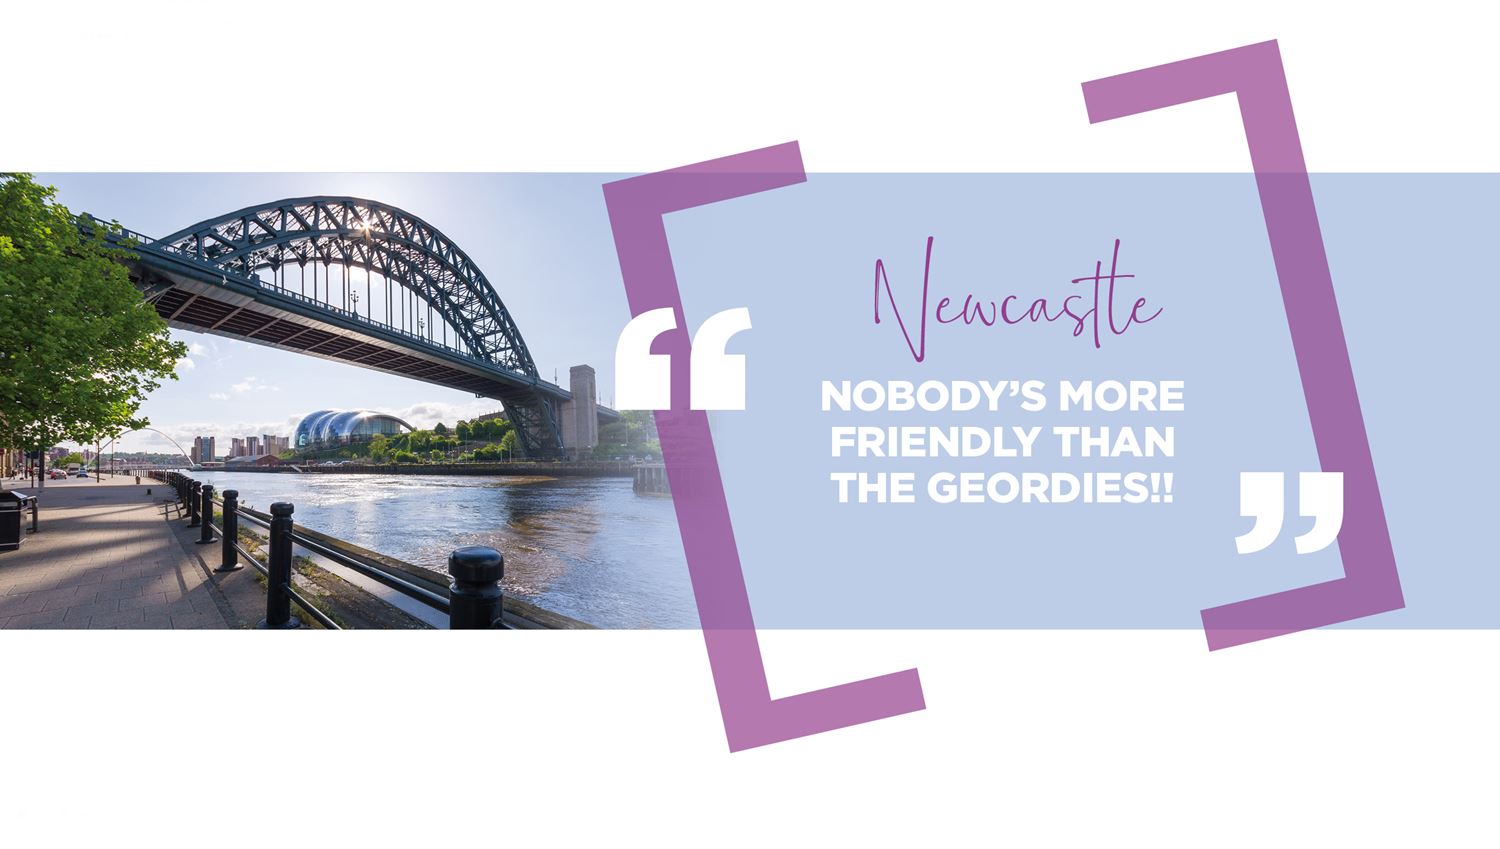 Quote about Newcastle "Nobody's more friendly thran the Geordies"